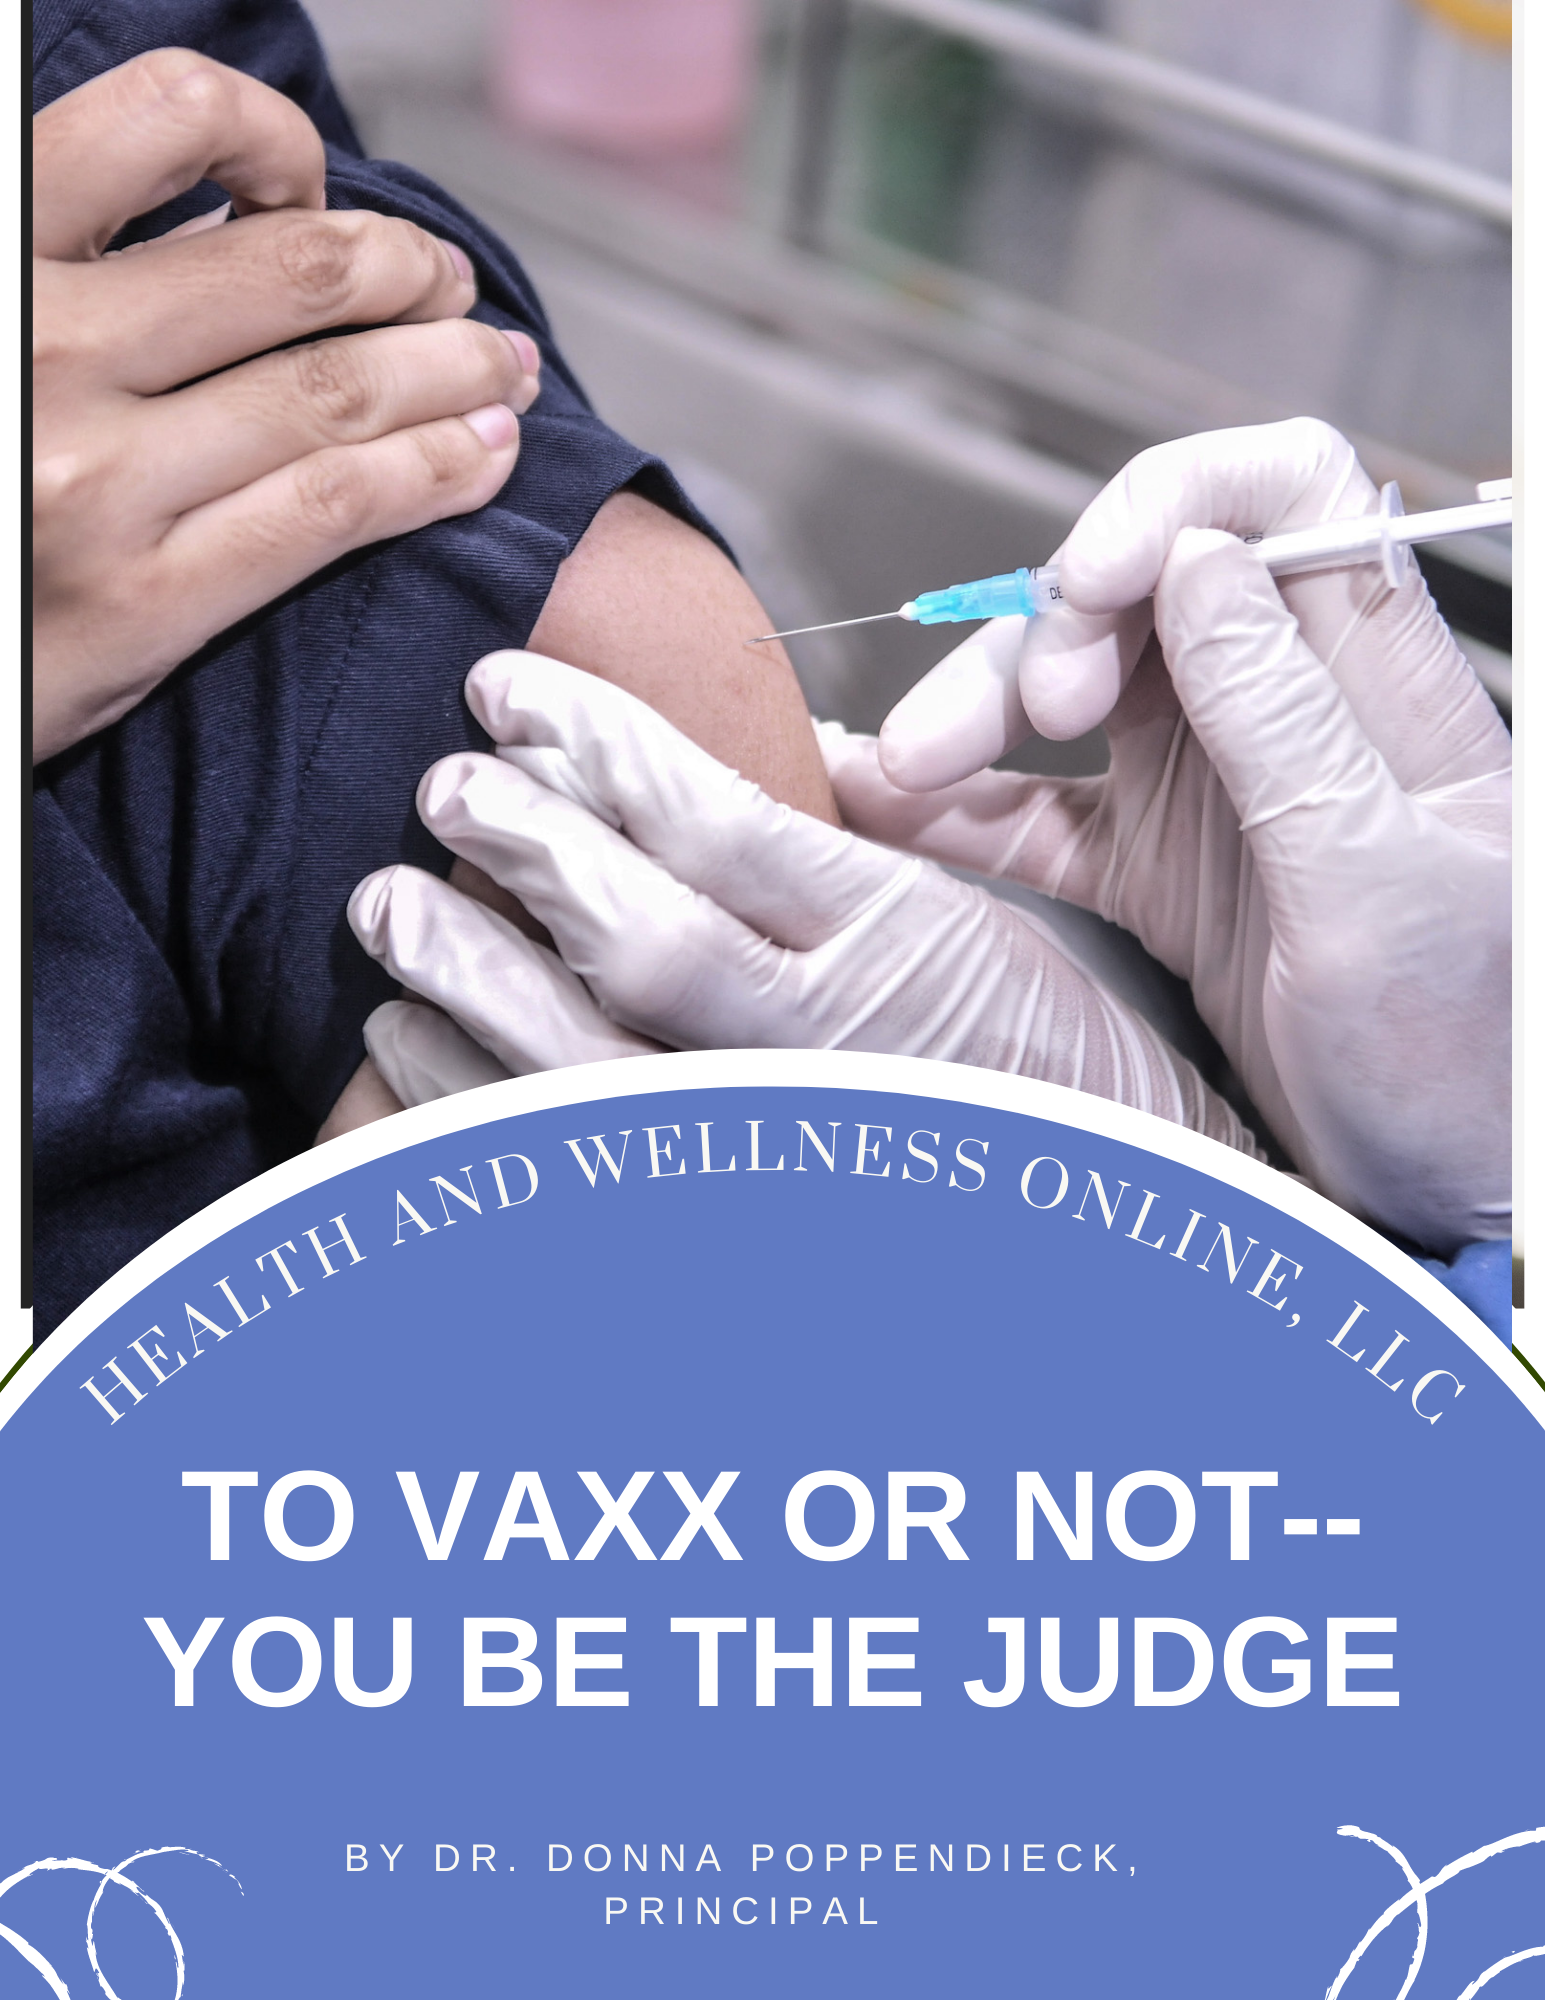 To Vaxx or Not: You be the Judge is a 4 CE Credit Hour Course by Dr. Donna Poppendieck from Health and Wellness Online.